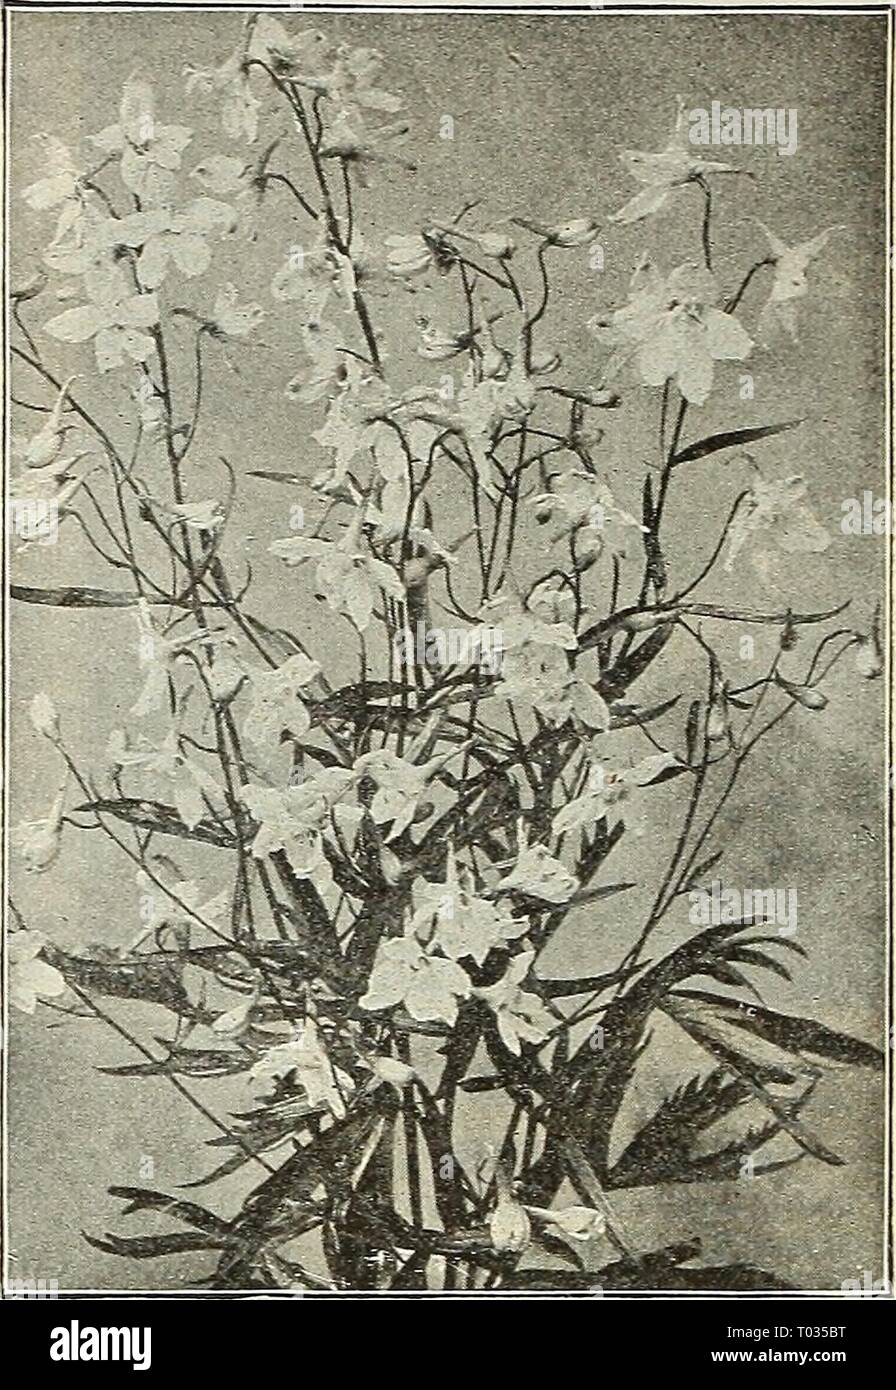 Dreer's garden calendar : 1903 . dreersgardencale1903henr Year: 1903  Digitalis Lanata Delphinium Belladonna. DODFXATHEON. (American Cowslip, or Shooting Star.) Meadia. One of the choicest of our native perennials, with broad, tufted foliage and tall, upright flower-stems; surmounted with showy reddish-purple flowers, with rich orange-yellow eyes. They should be planted'in a cool, shaded postion, either in the border or rockery. 20 cts. each ; §2.00 per doz. DICTAMNUS (Gas Plant). A very showy border perennial, form- ing a bush about 2i feet in height, having fragrant foliage and spikes of cur Stock Photo